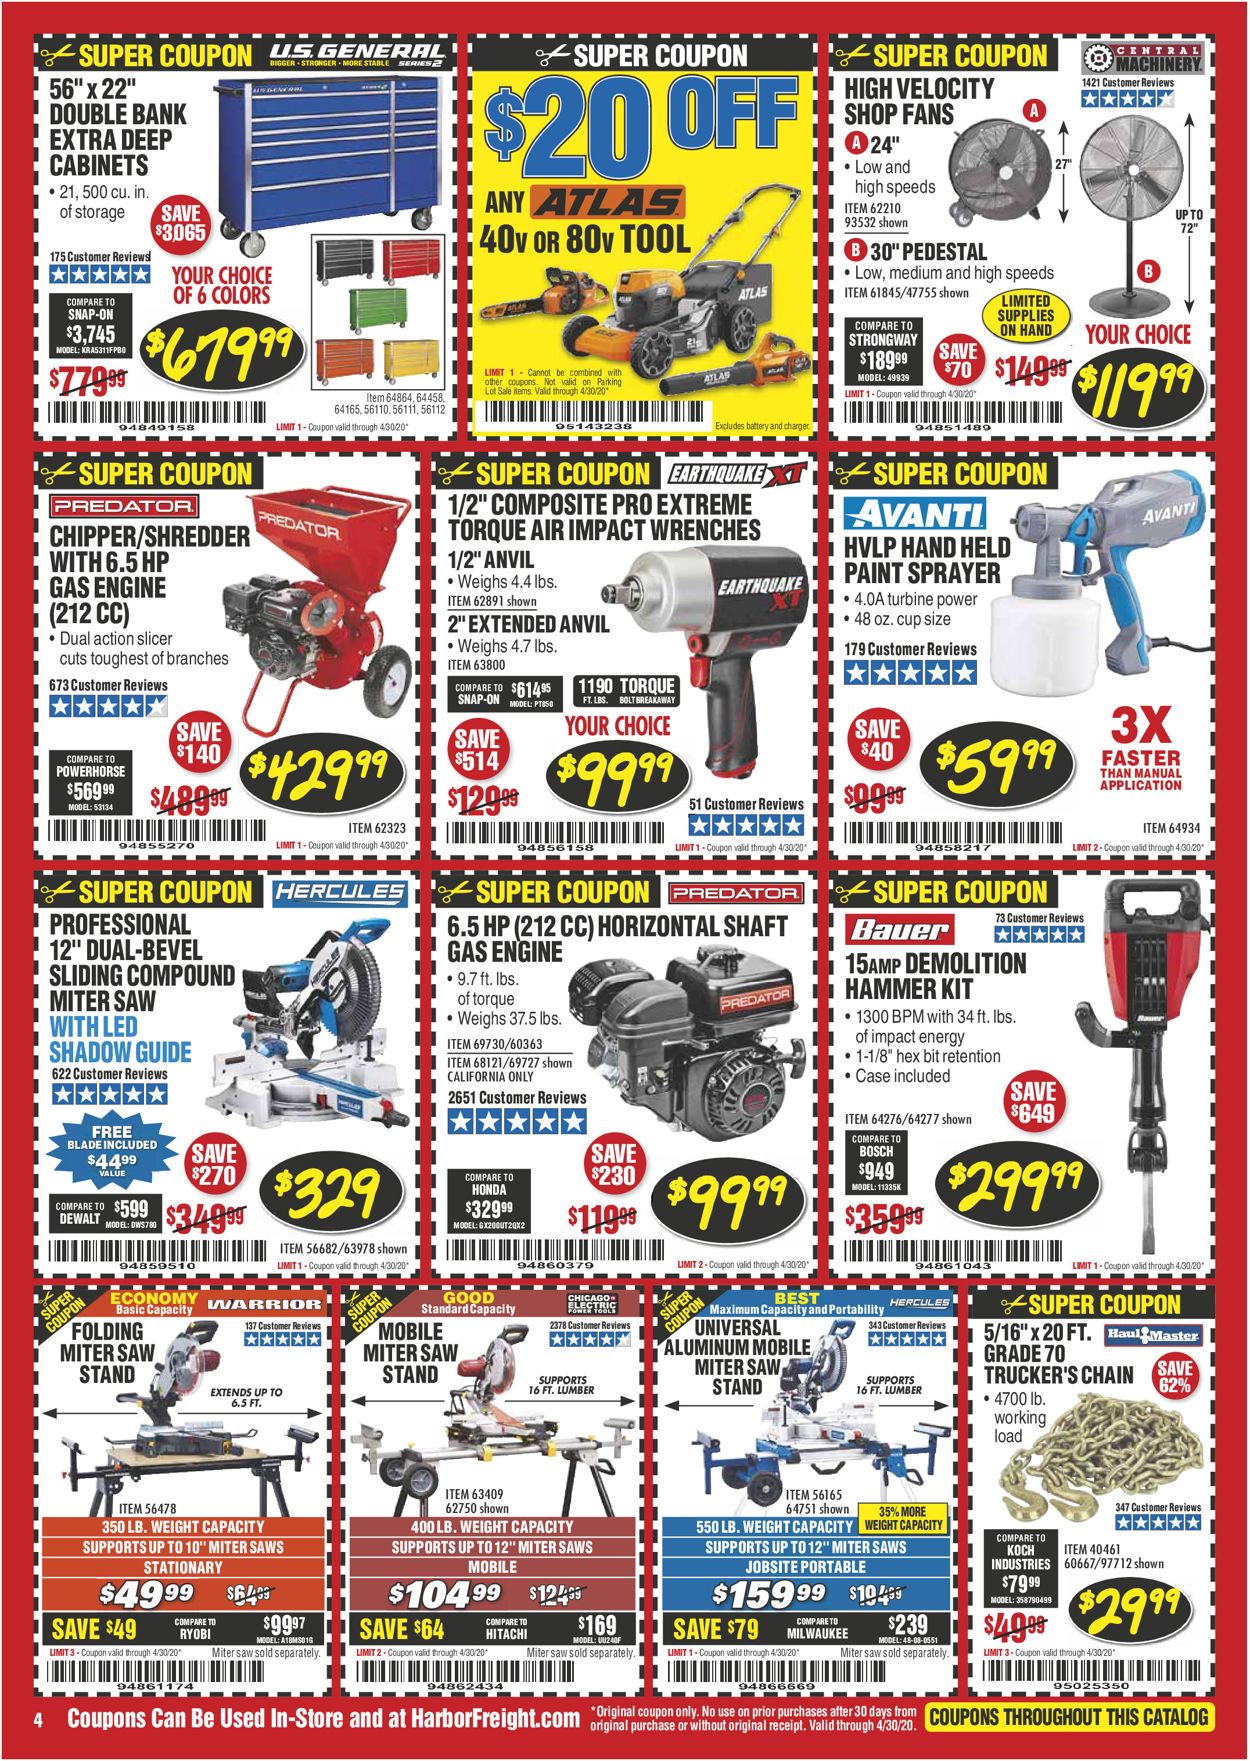 Harbor Freight Current weekly ad 04/01 04/30/2020 [4]